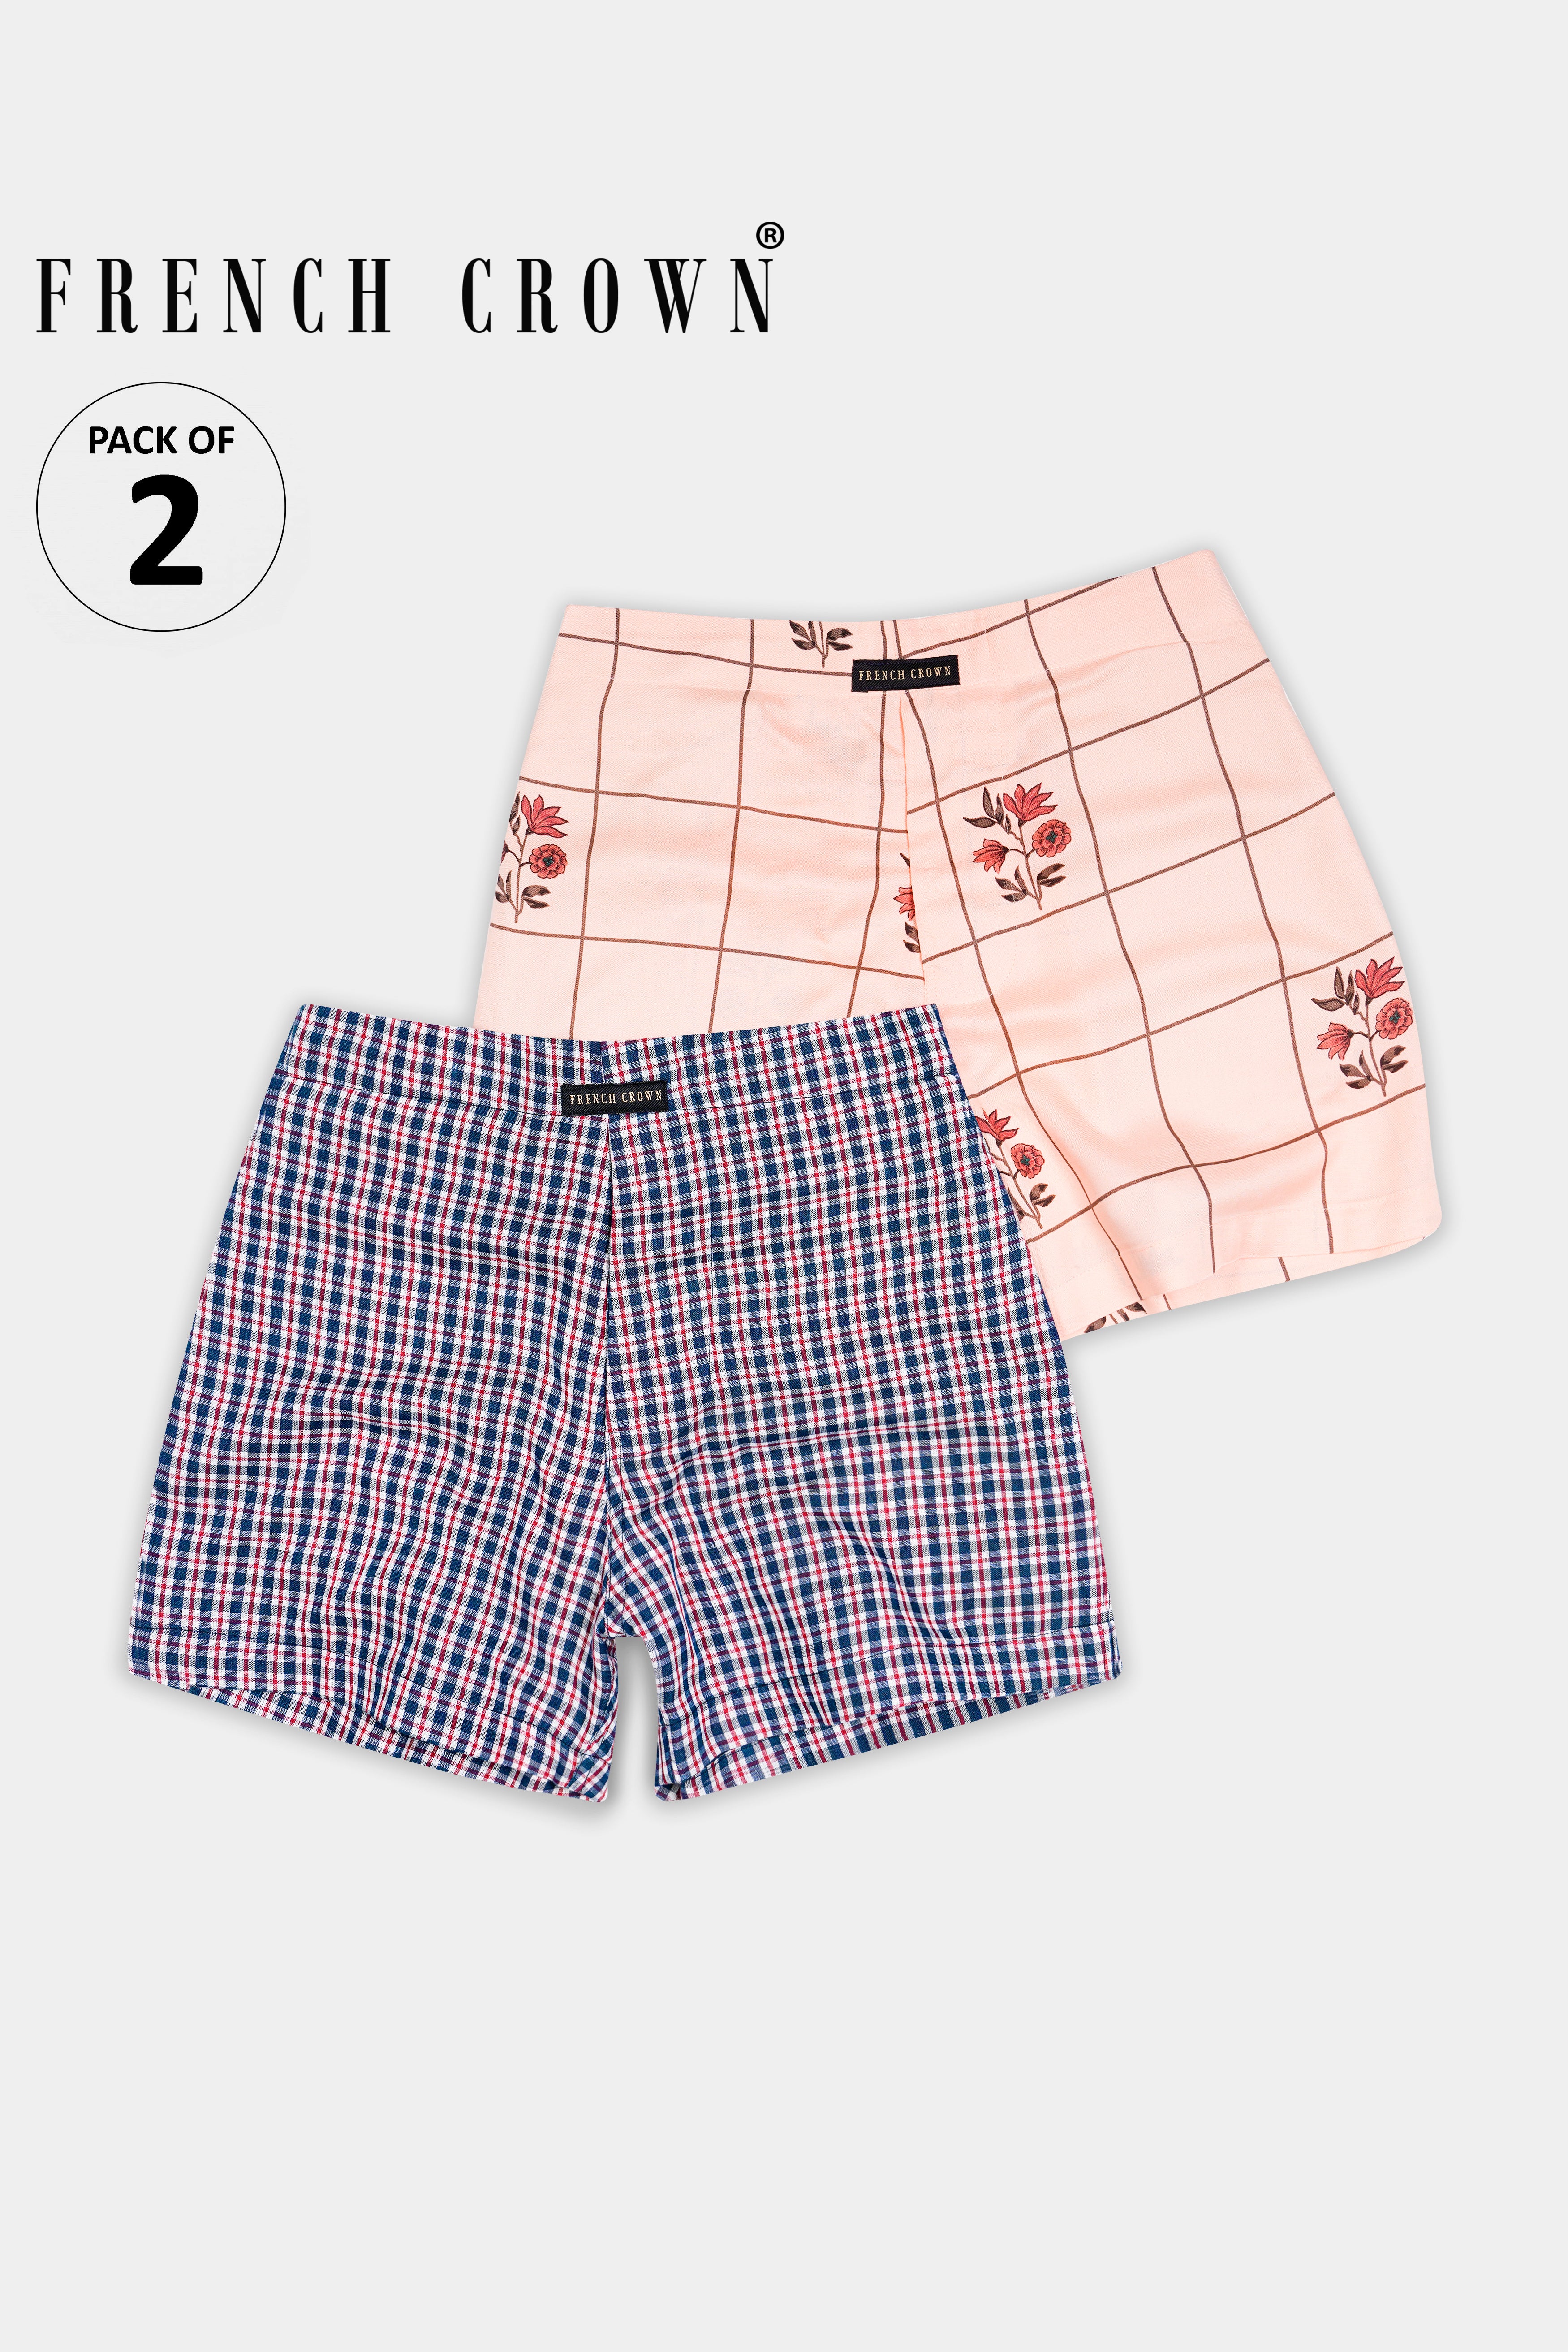 Rose Bud Peach Windowpane with Floral Pritned Premium Tencel and Nile Blue with Stiletto Red Checkered Royal Oxford Boxers BX554-BX524-28, BX554-BX524-30, BX554-BX524-32, BX554-BX524-34, BX554-BX524-36, BX554-BX524-38, BX554-BX524-40, BX554-BX524-42, BX554-BX524-44